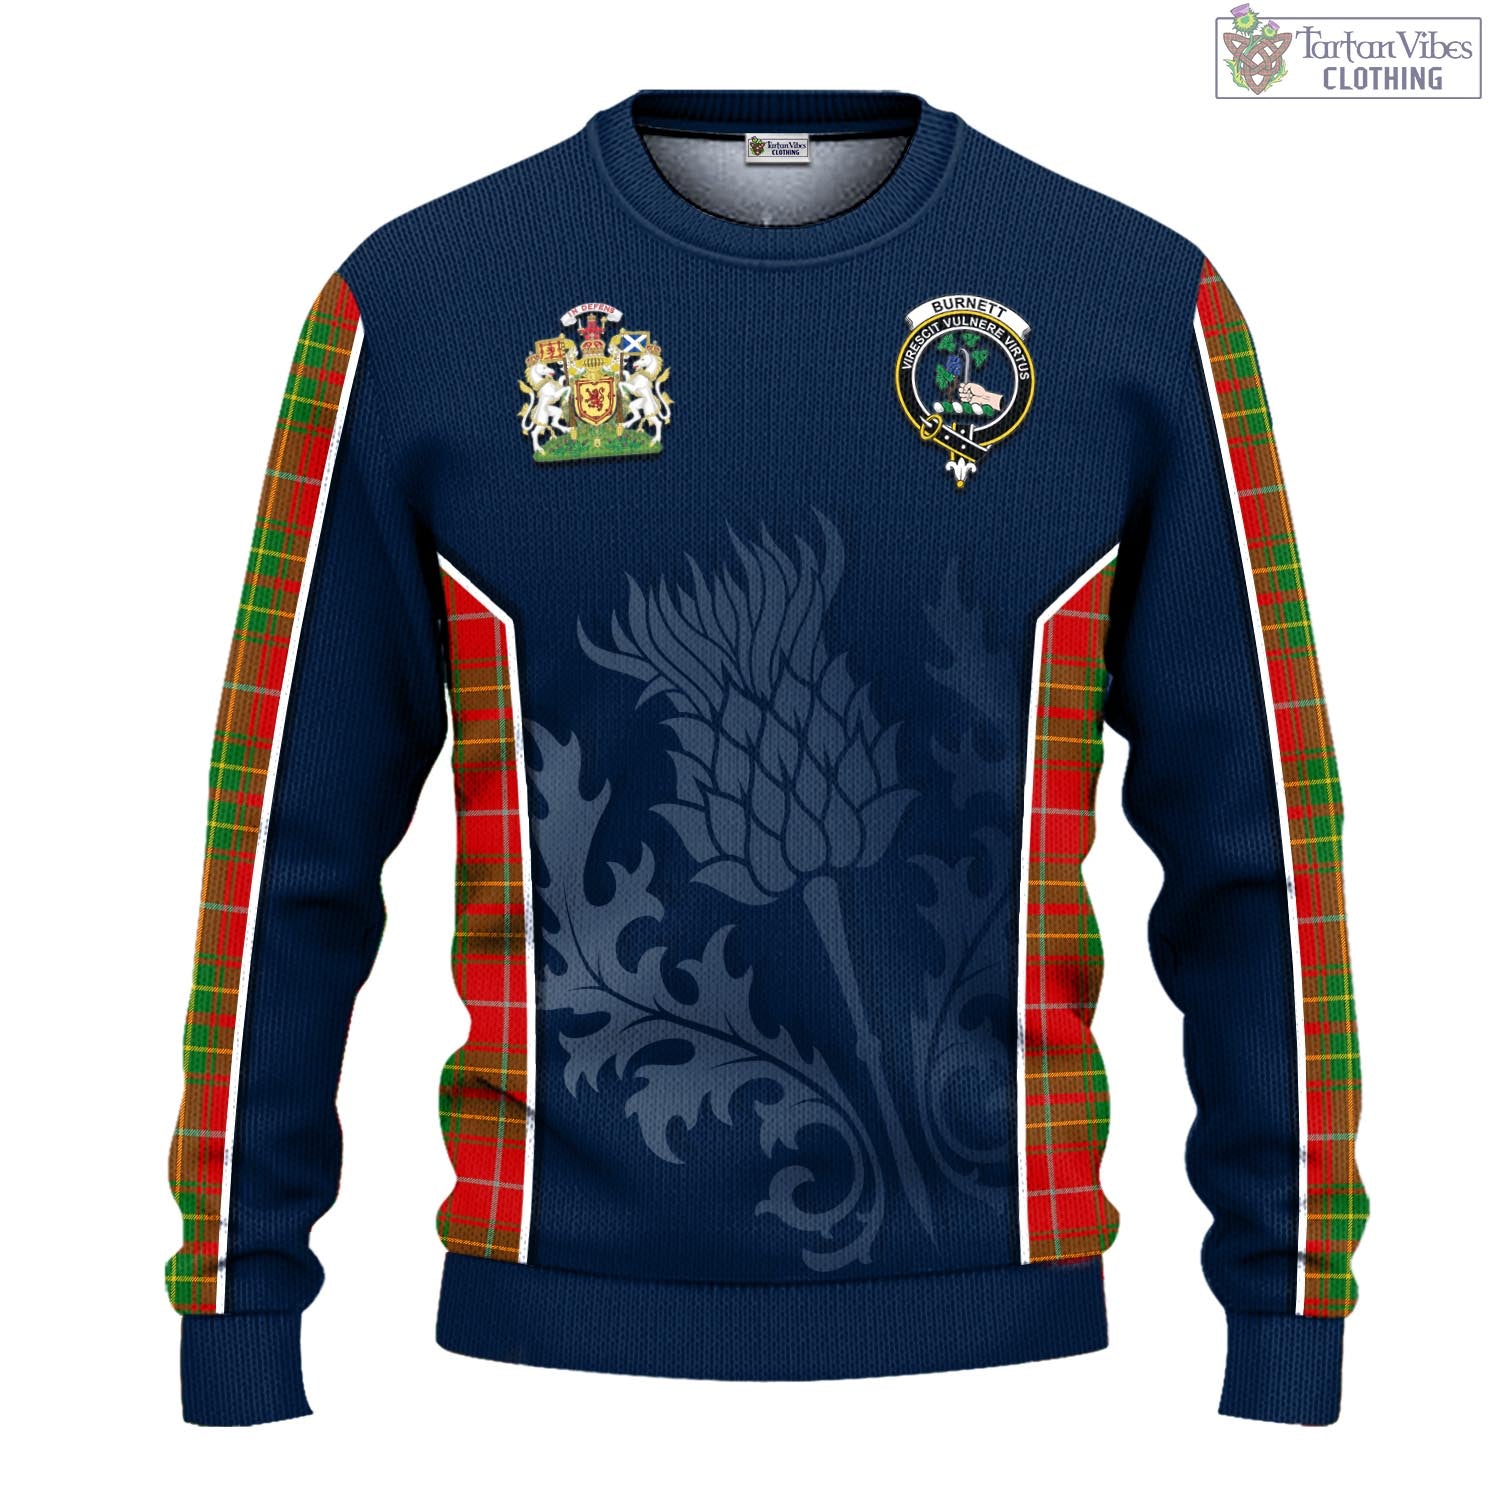 Tartan Vibes Clothing Burnett Ancient Tartan Knitted Sweatshirt with Family Crest and Scottish Thistle Vibes Sport Style